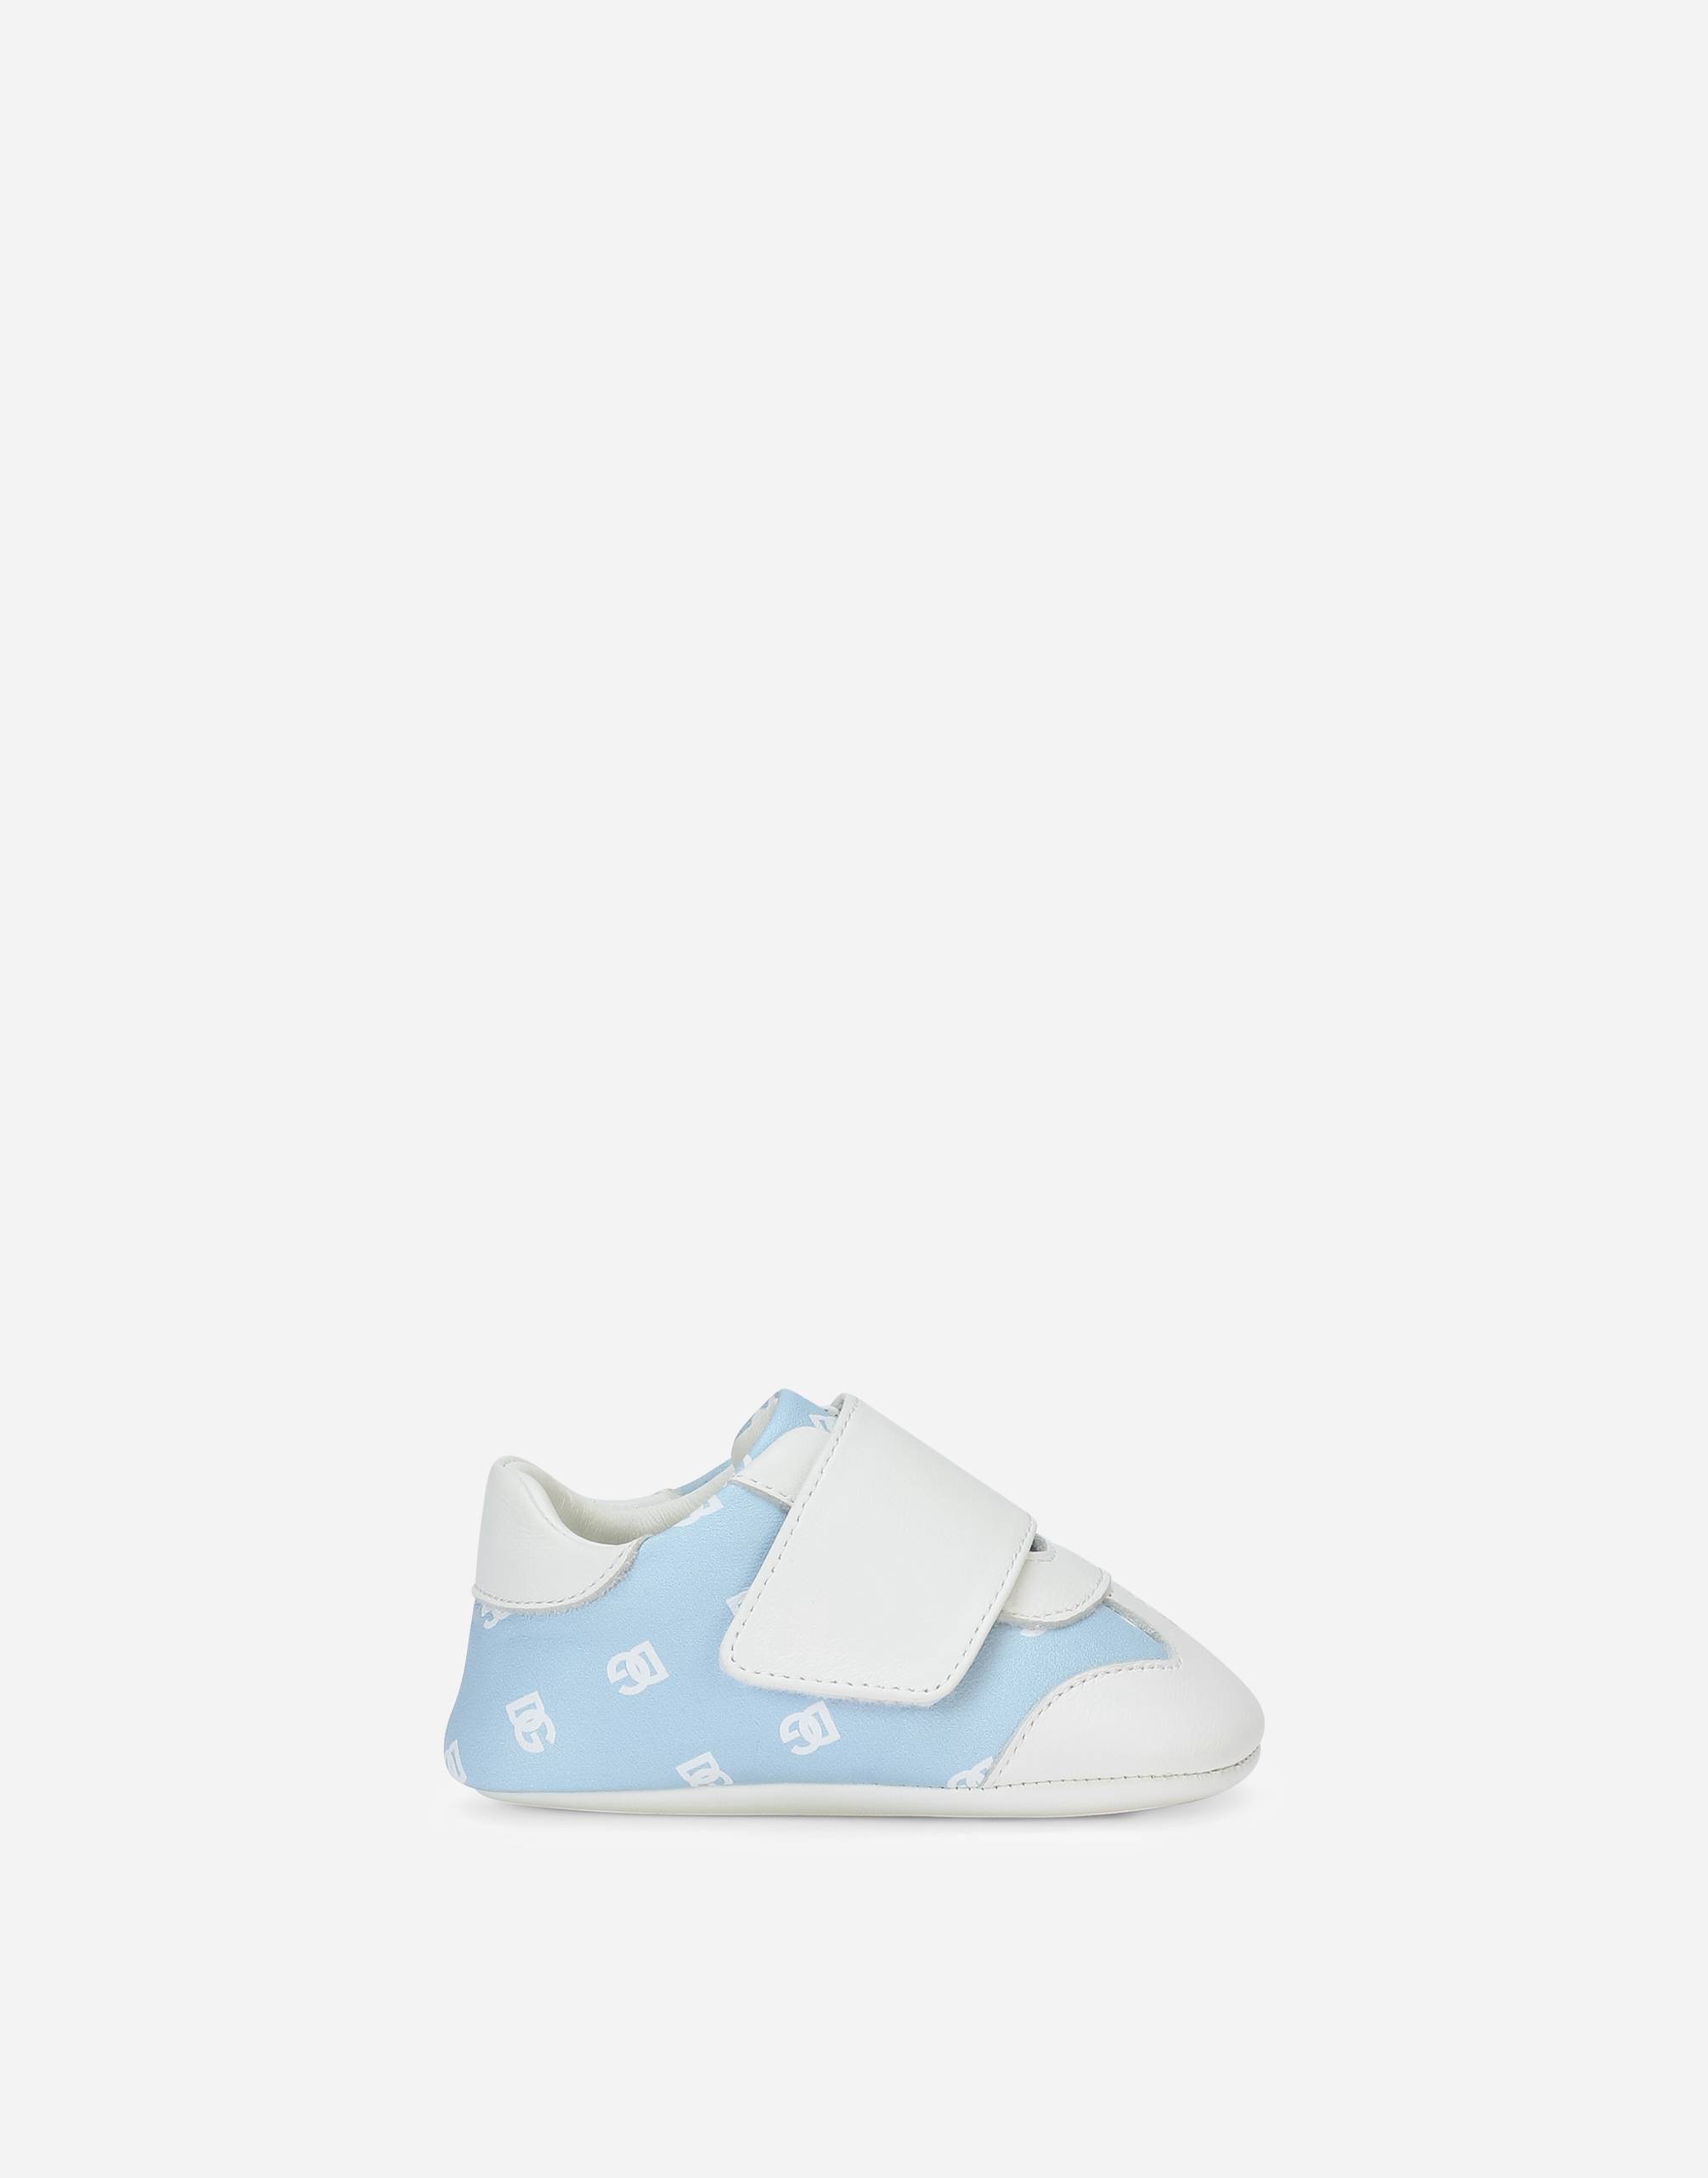 Nappa leather newborn sneakers with DG-logo print in Azure